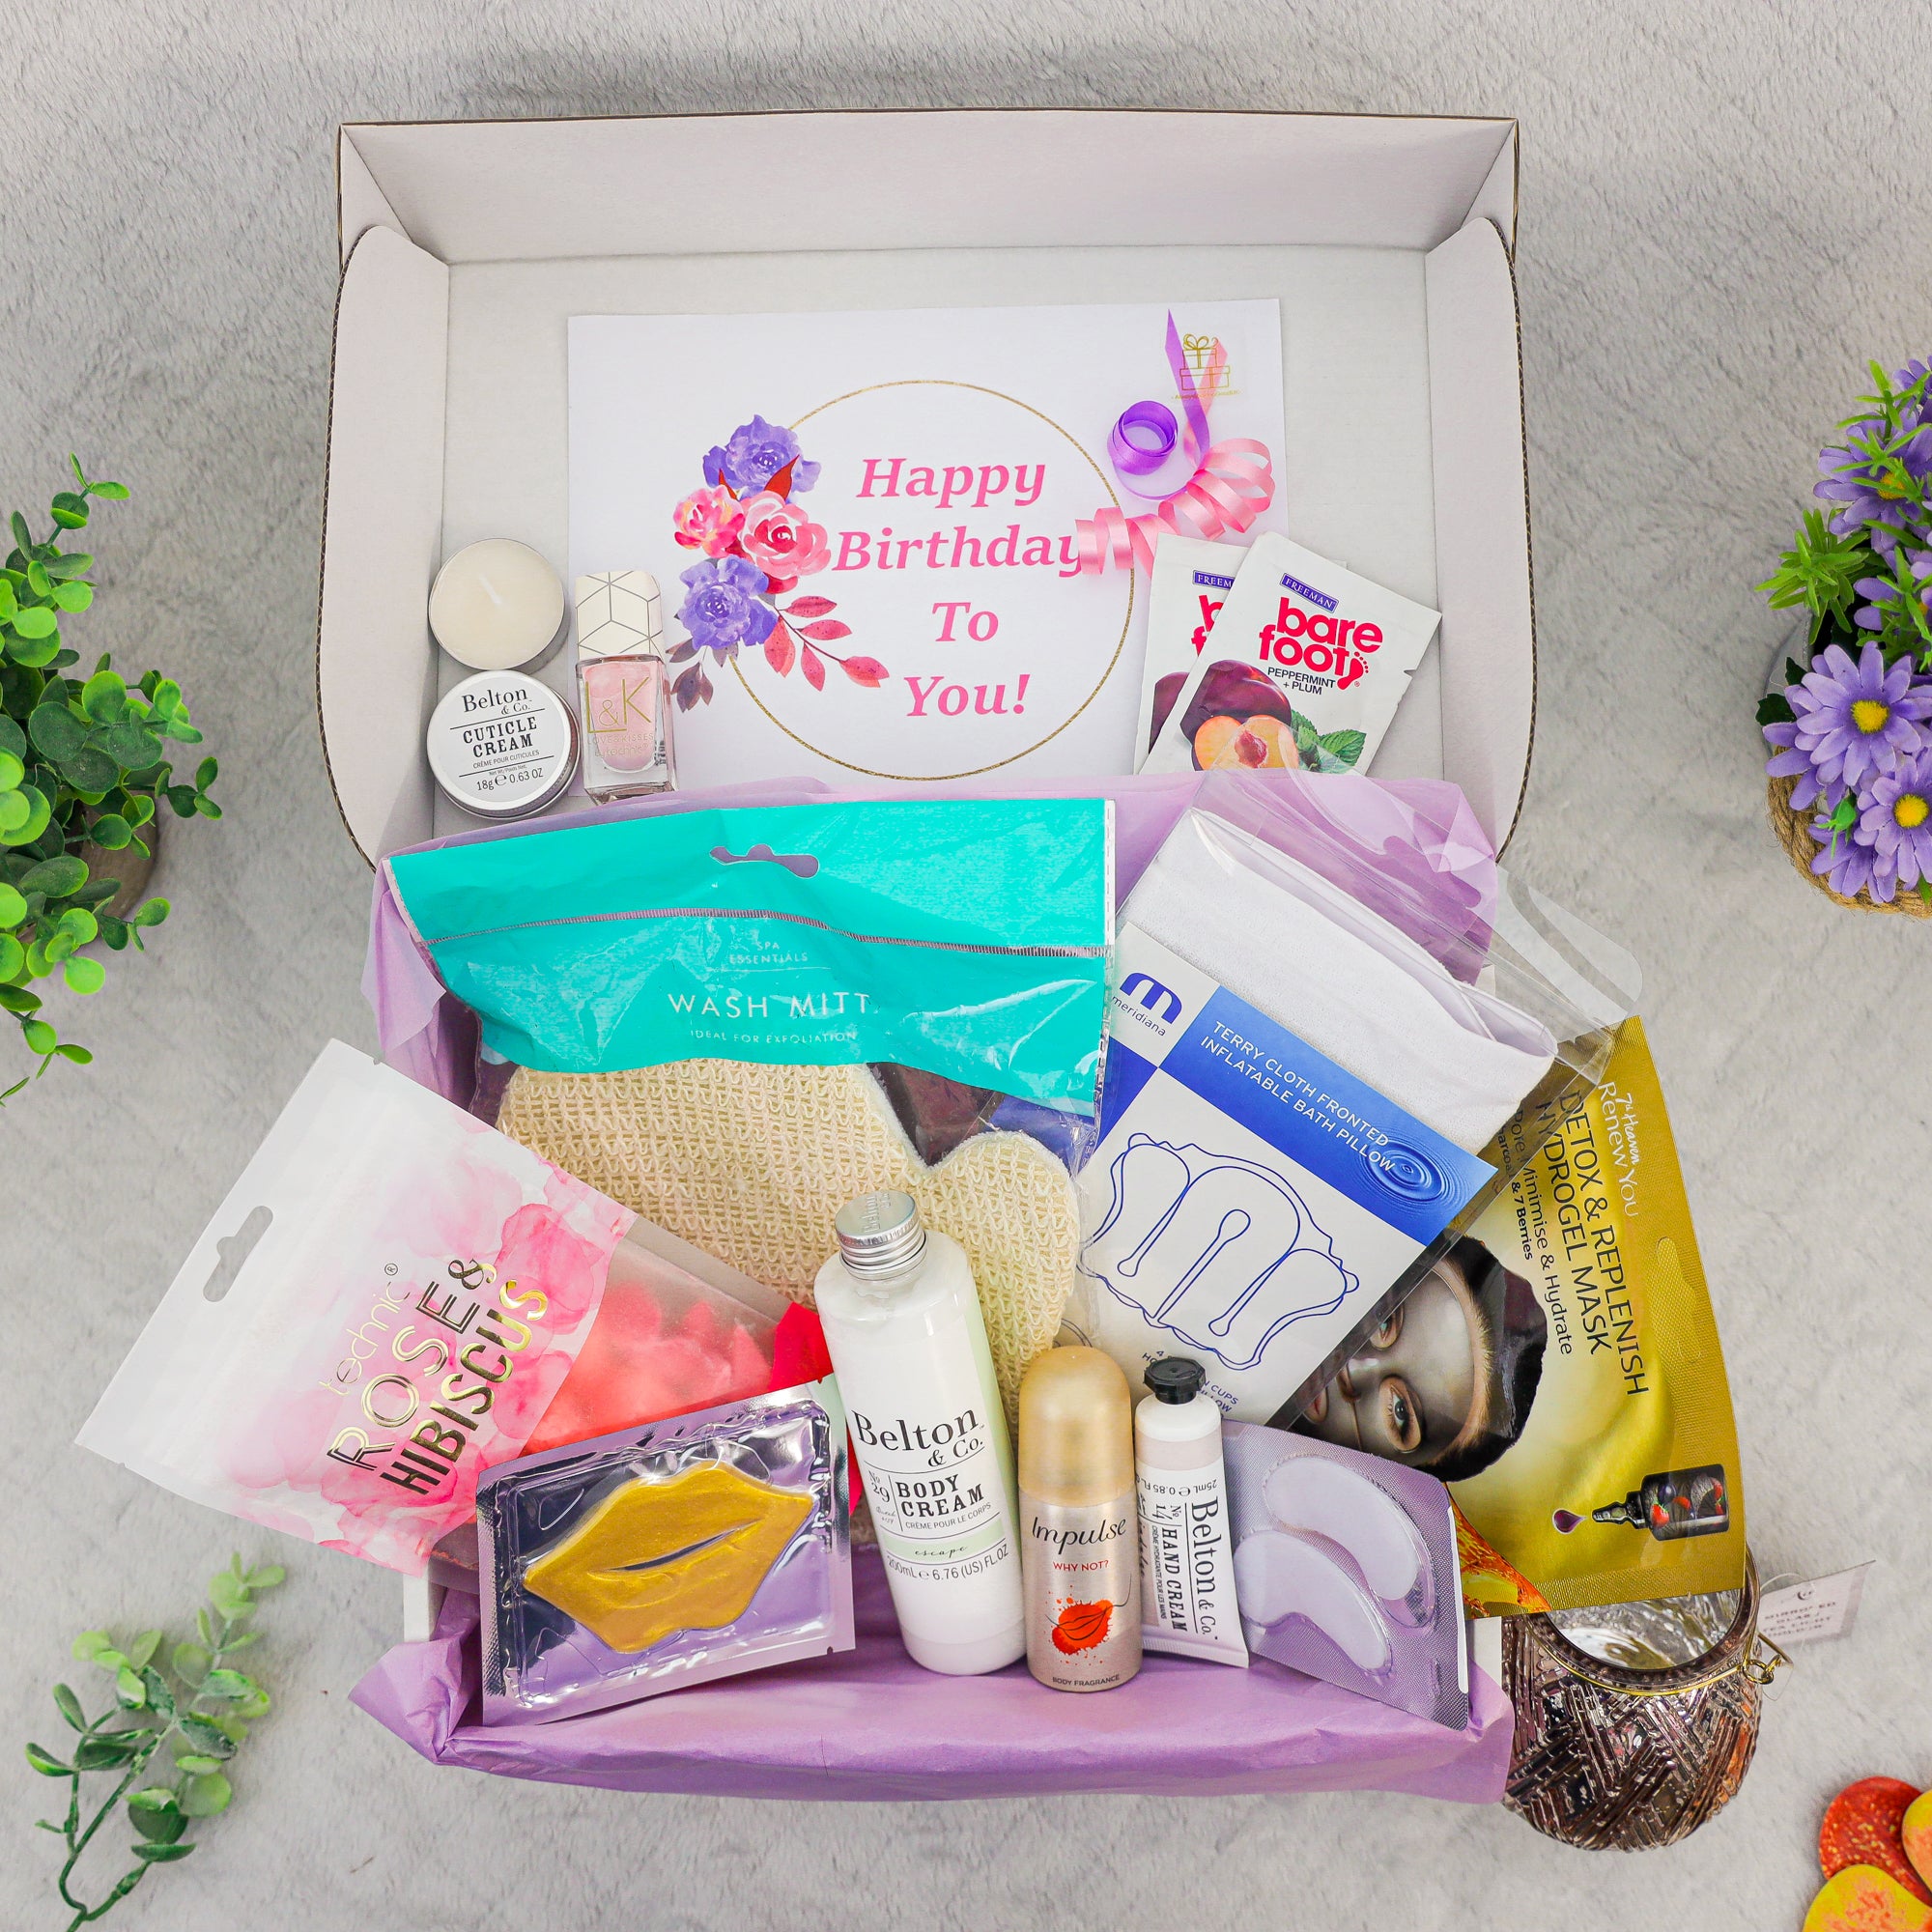 How to PAMPER Mom on Mother's Day with DIY Gift Ideas - The Boondocks Blog